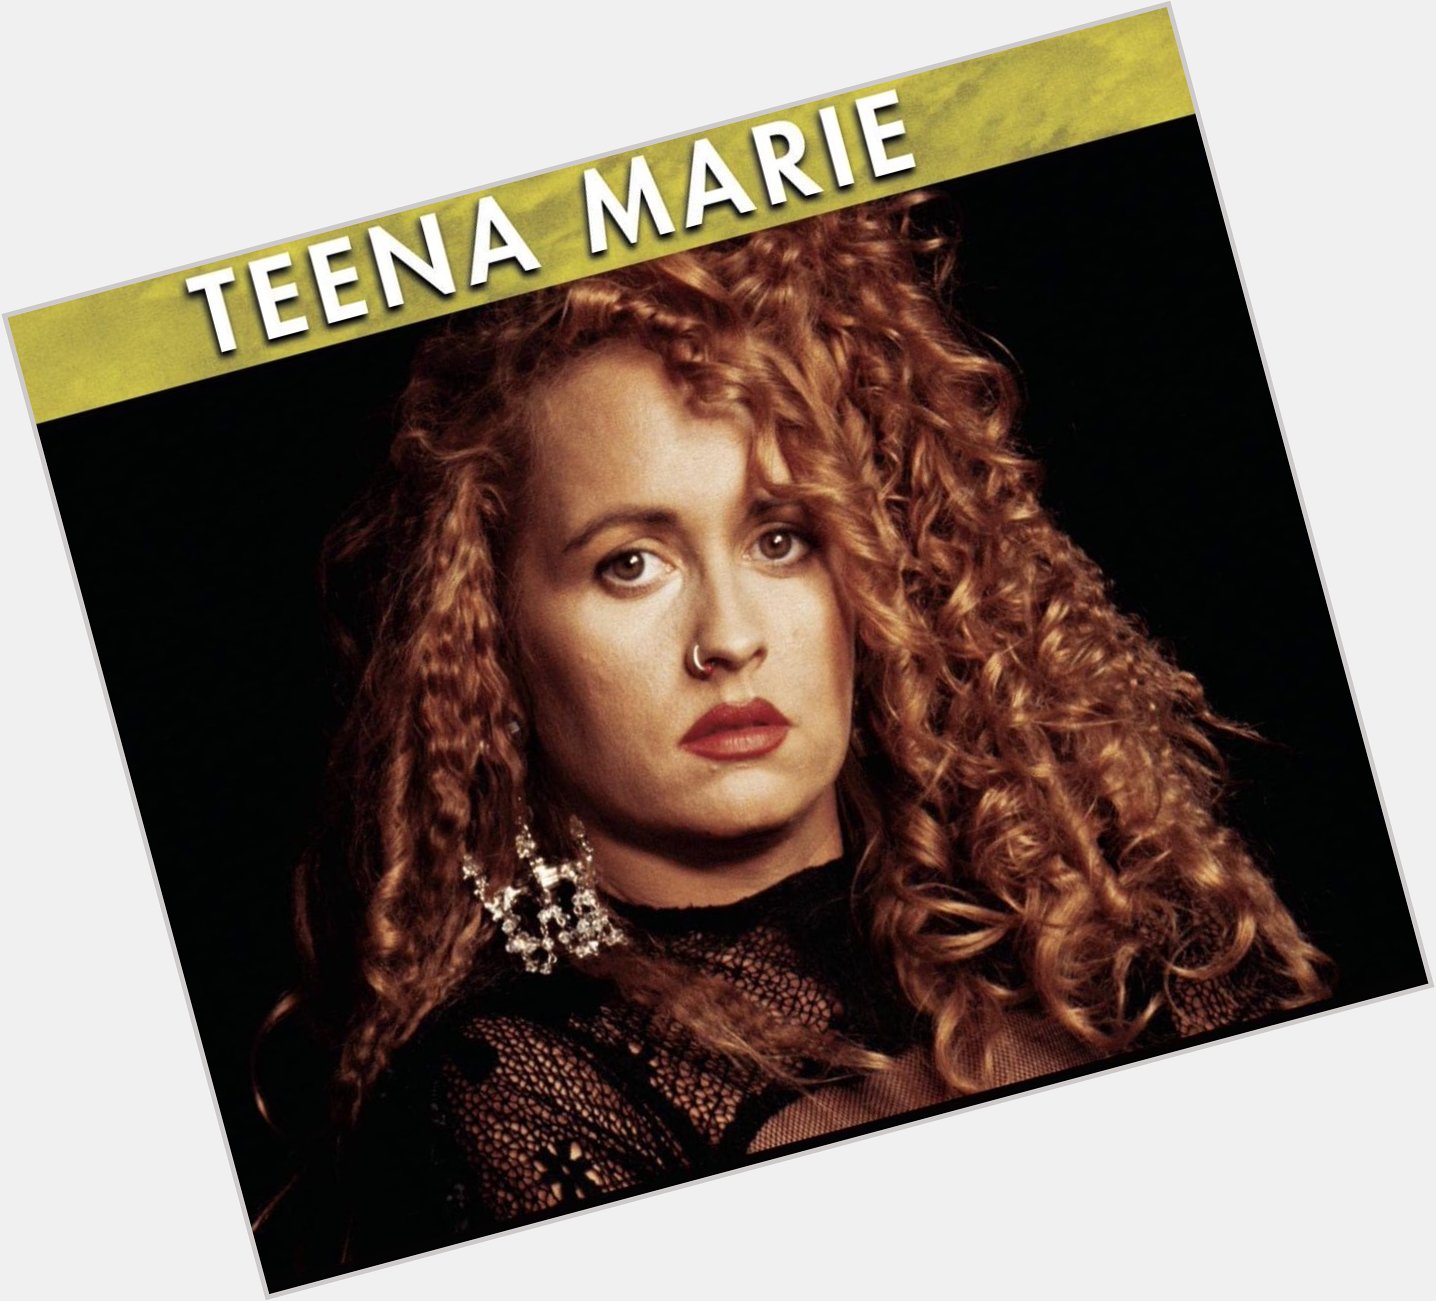 Happy Birthday to the late legend TEENA MARIE! Rest peacefully La Dona 